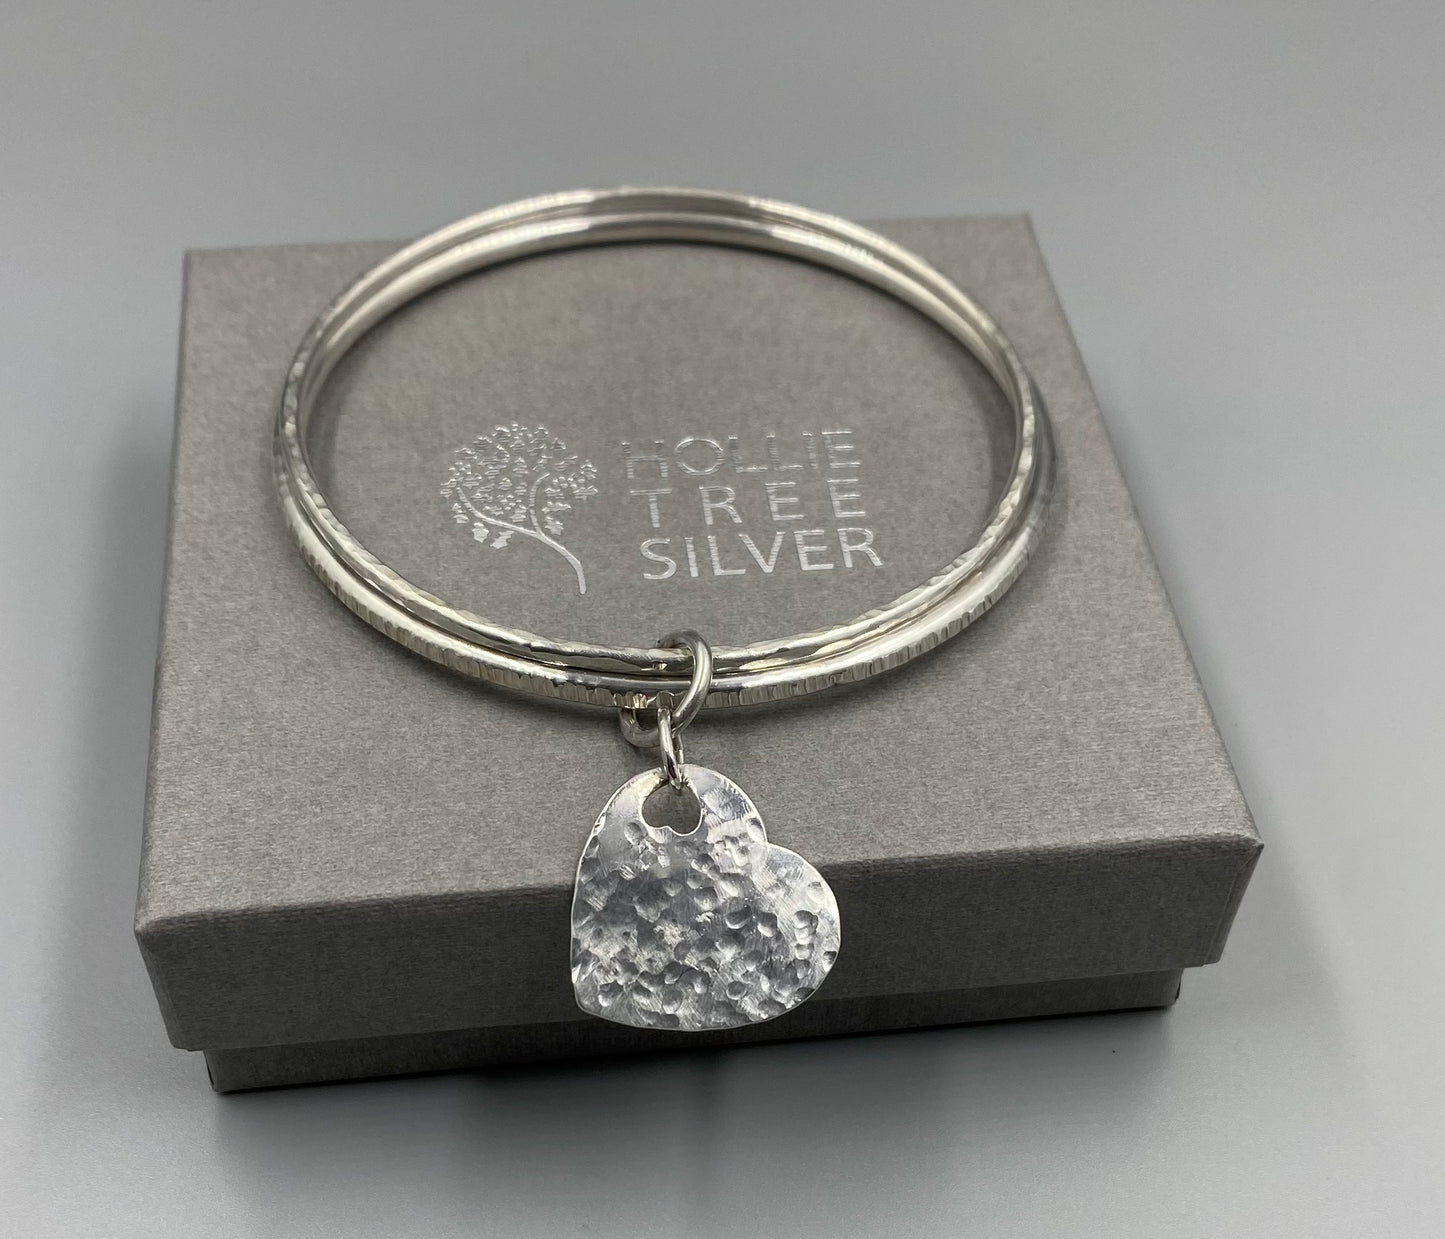 Sterling silver dimple and linear texture double bangle with a heart charm